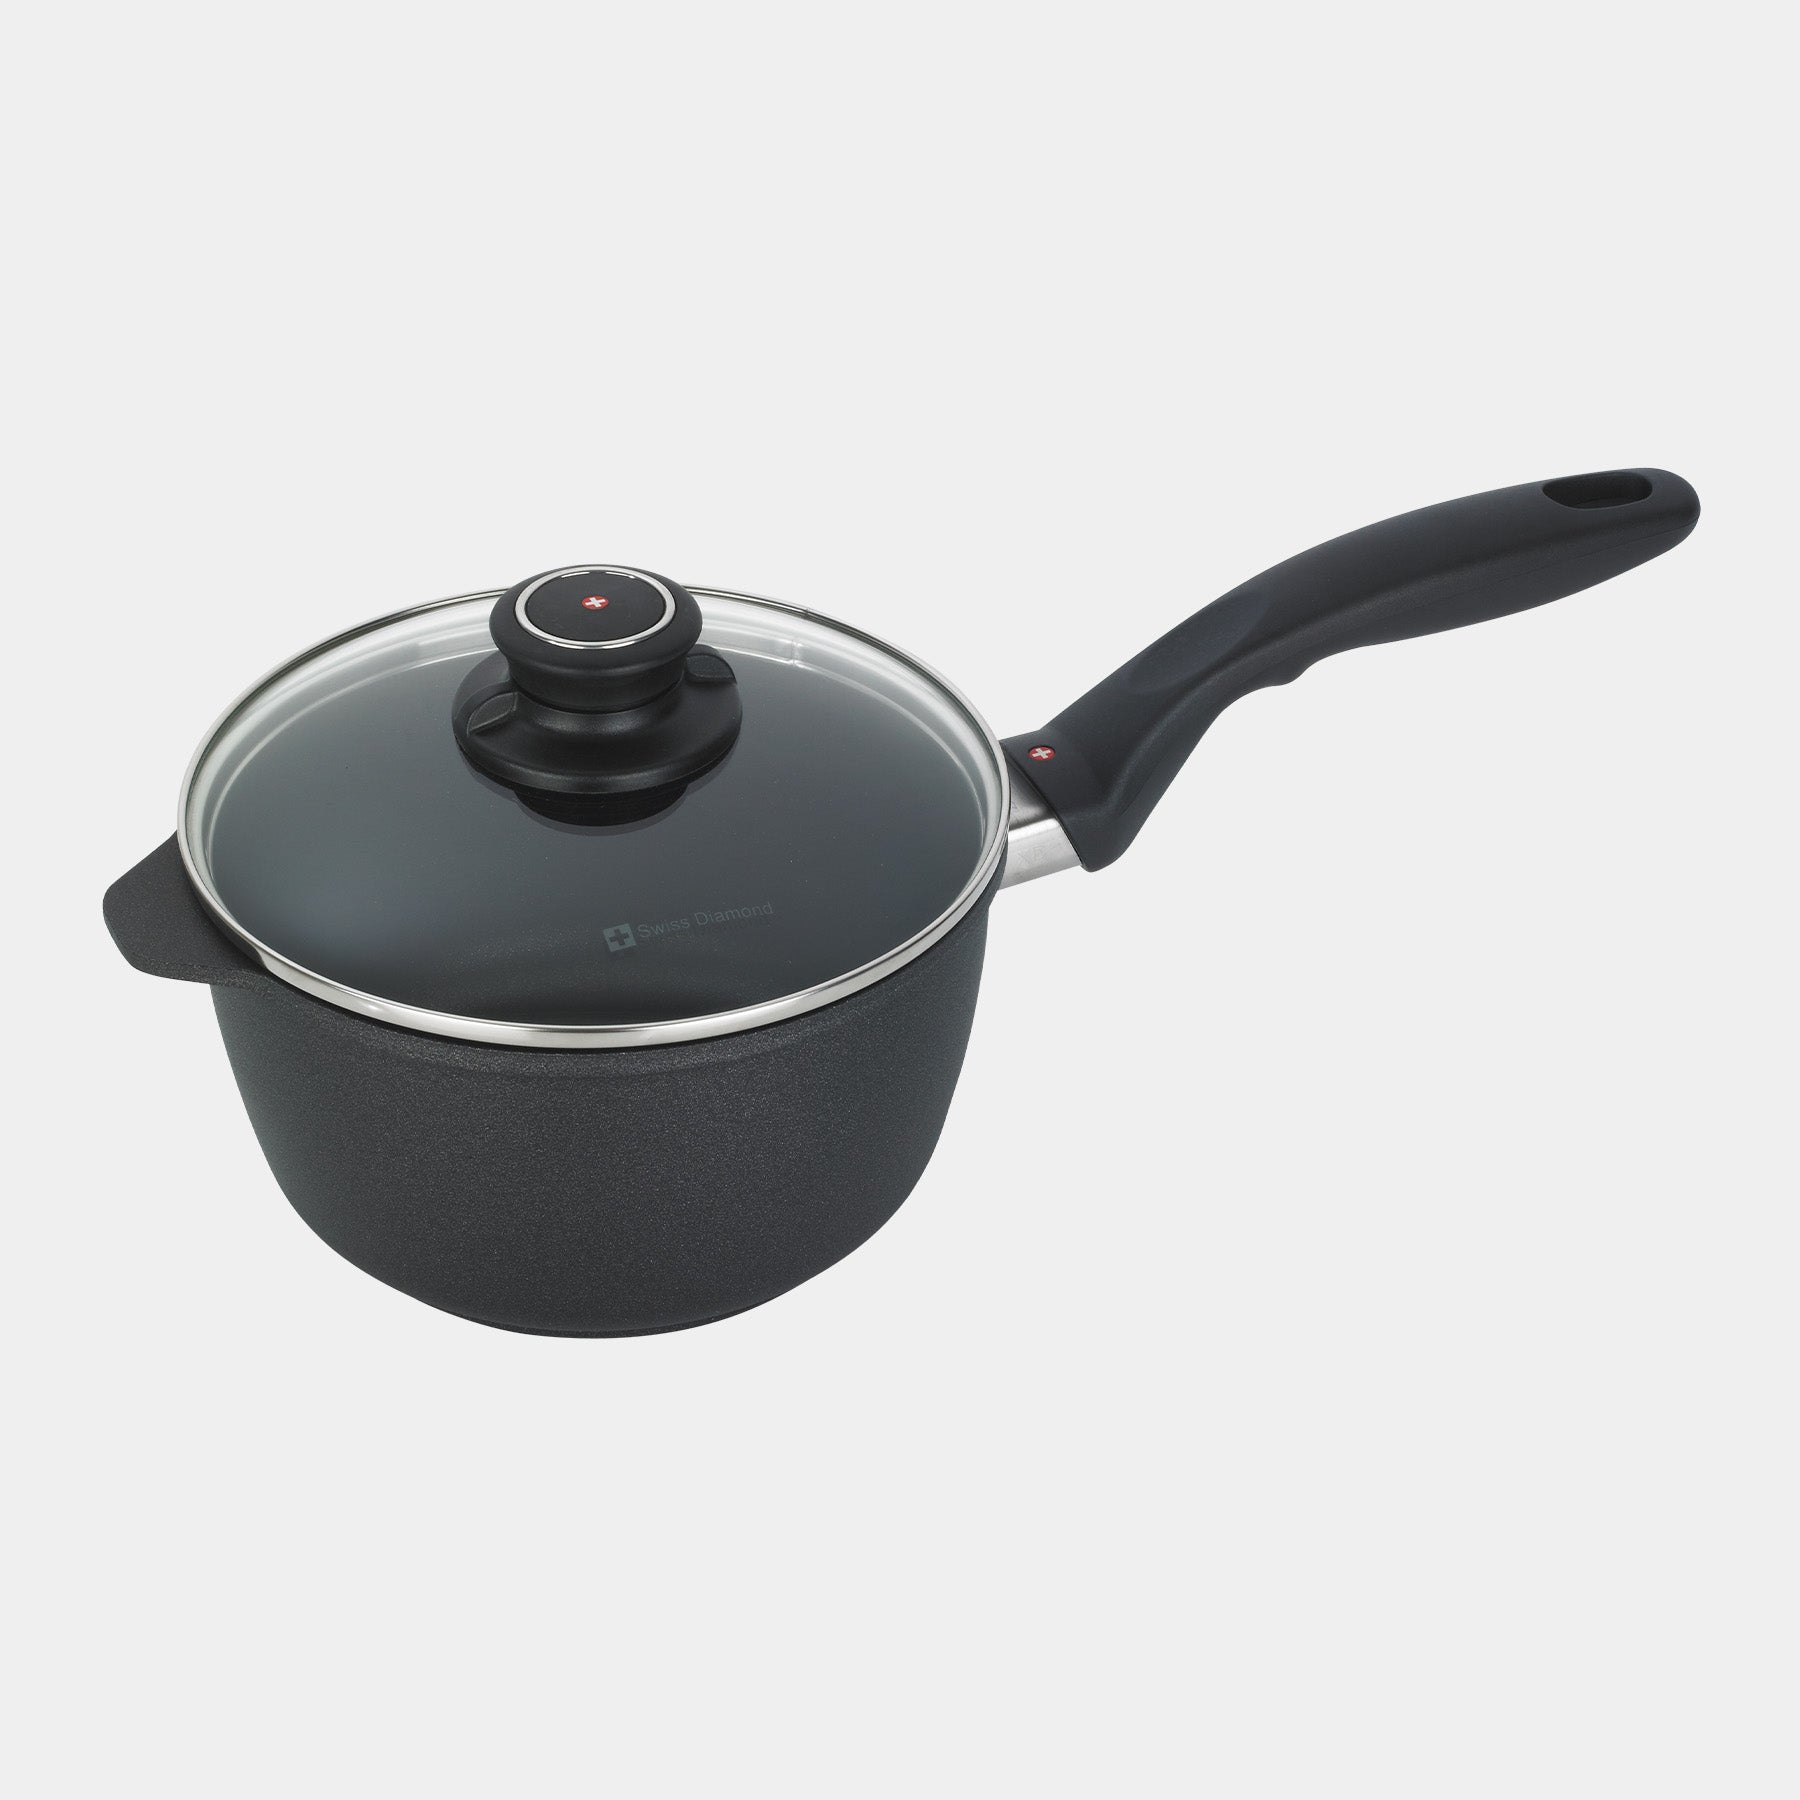 XD Nonstick 1.4 qt Saucepan with Glass Lid - Induction